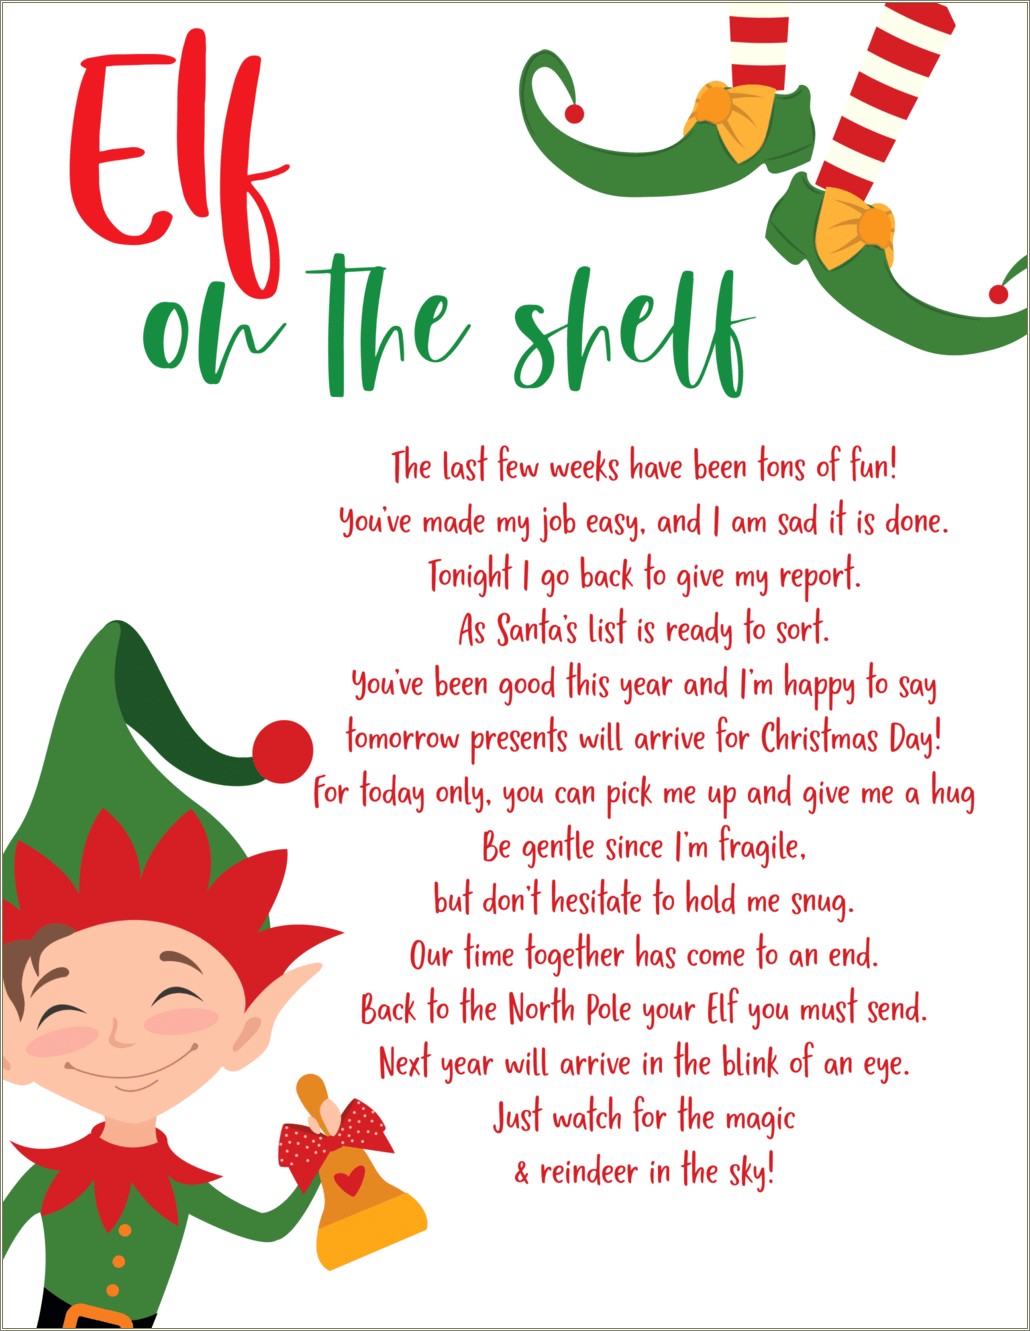 letter-from-elf-on-the-shelf-template-free-resume-example-gallery